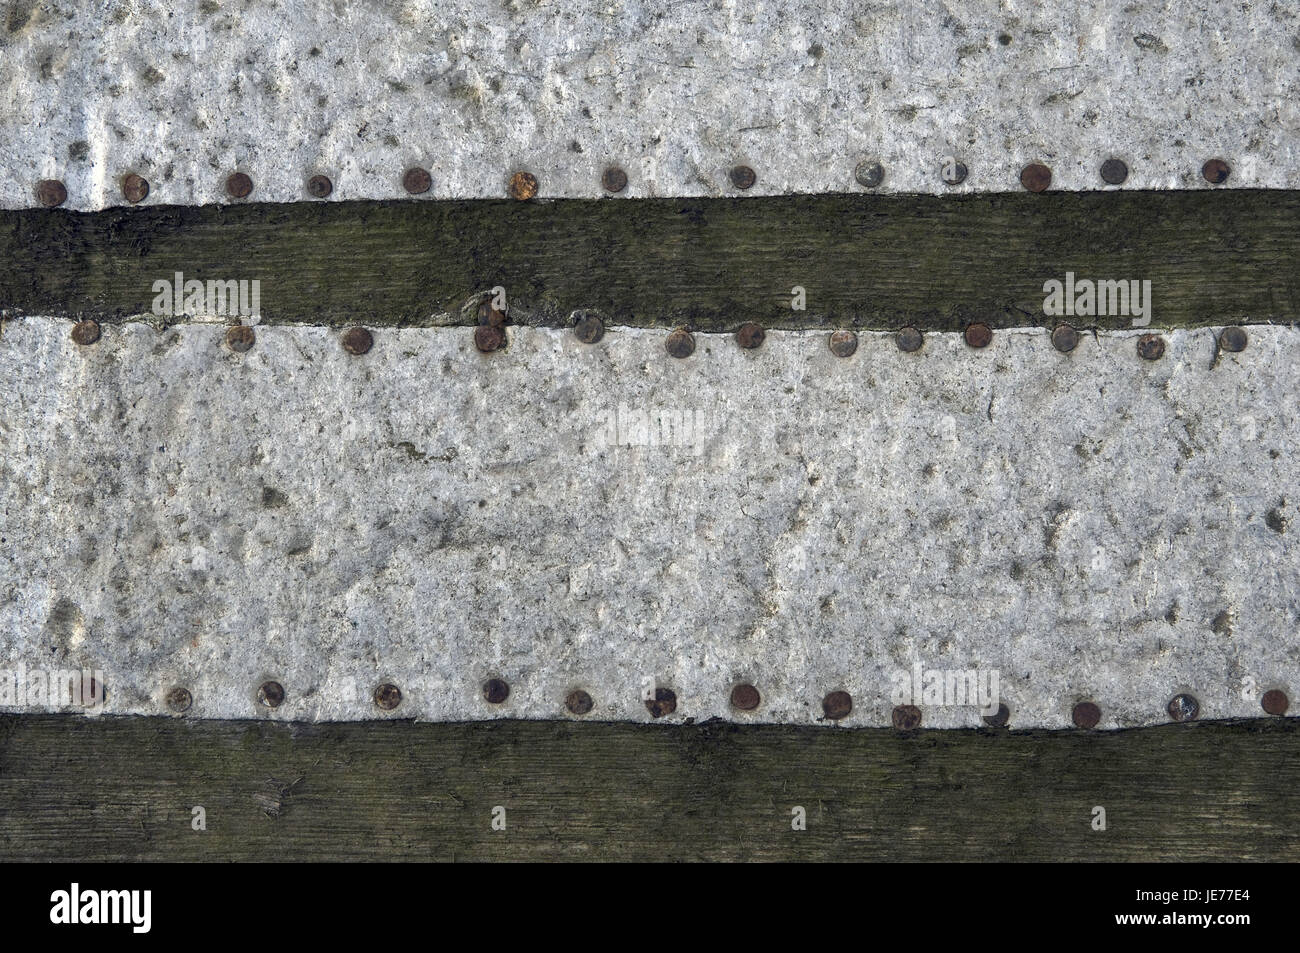 Conception, old boot, outer wall, woodwork, aluminium, nails, medium close-up, detail, Stock Photo